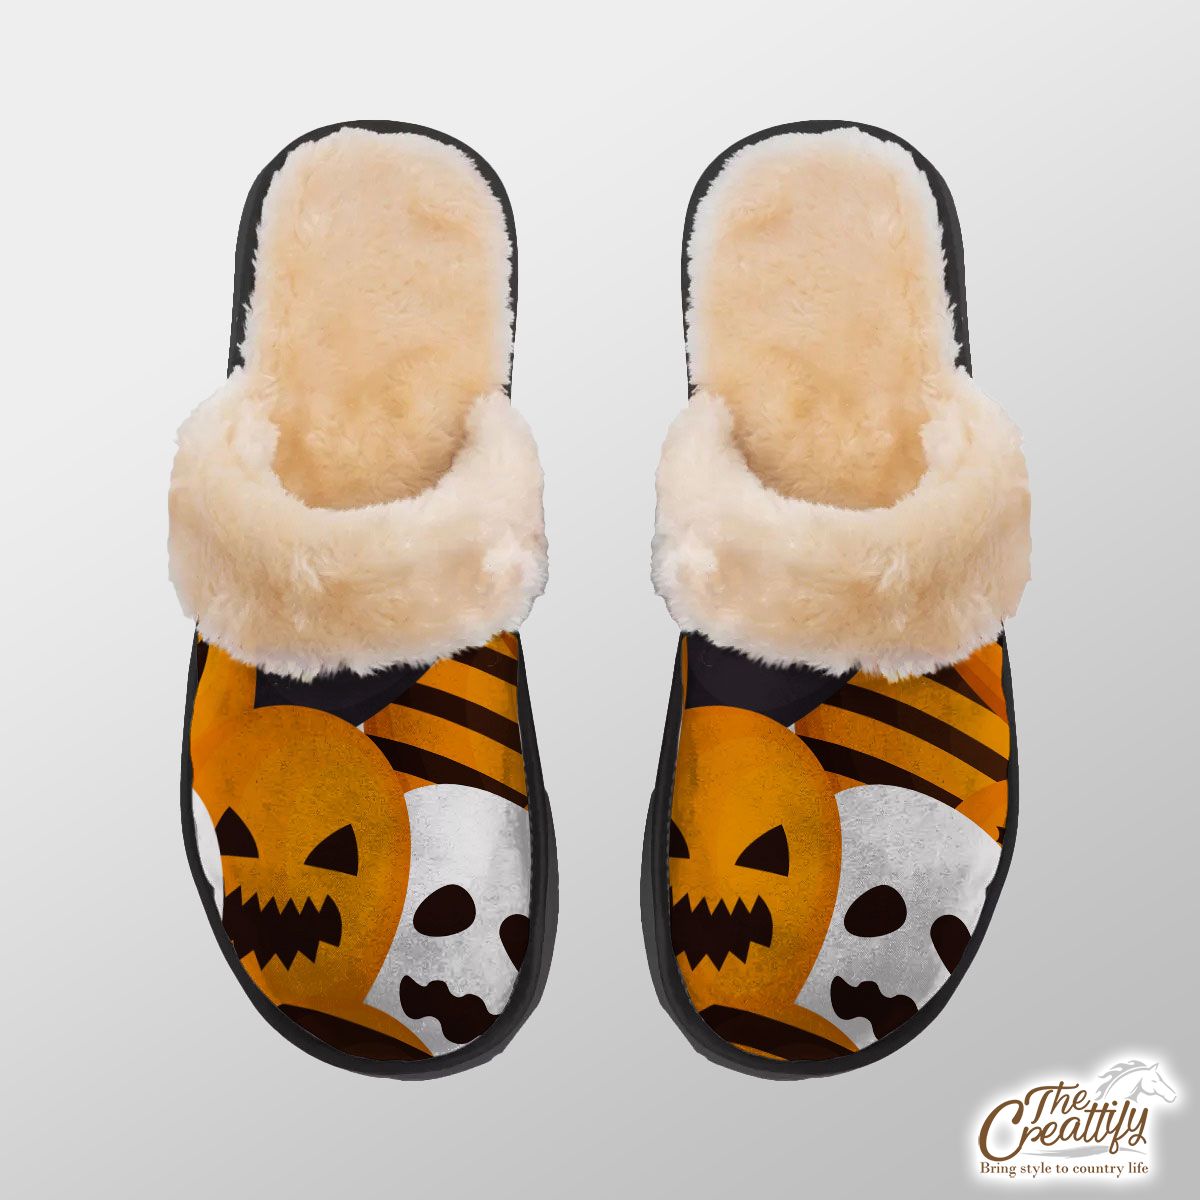 Halloween Balloons With Scary Faces Home Plush Slippers